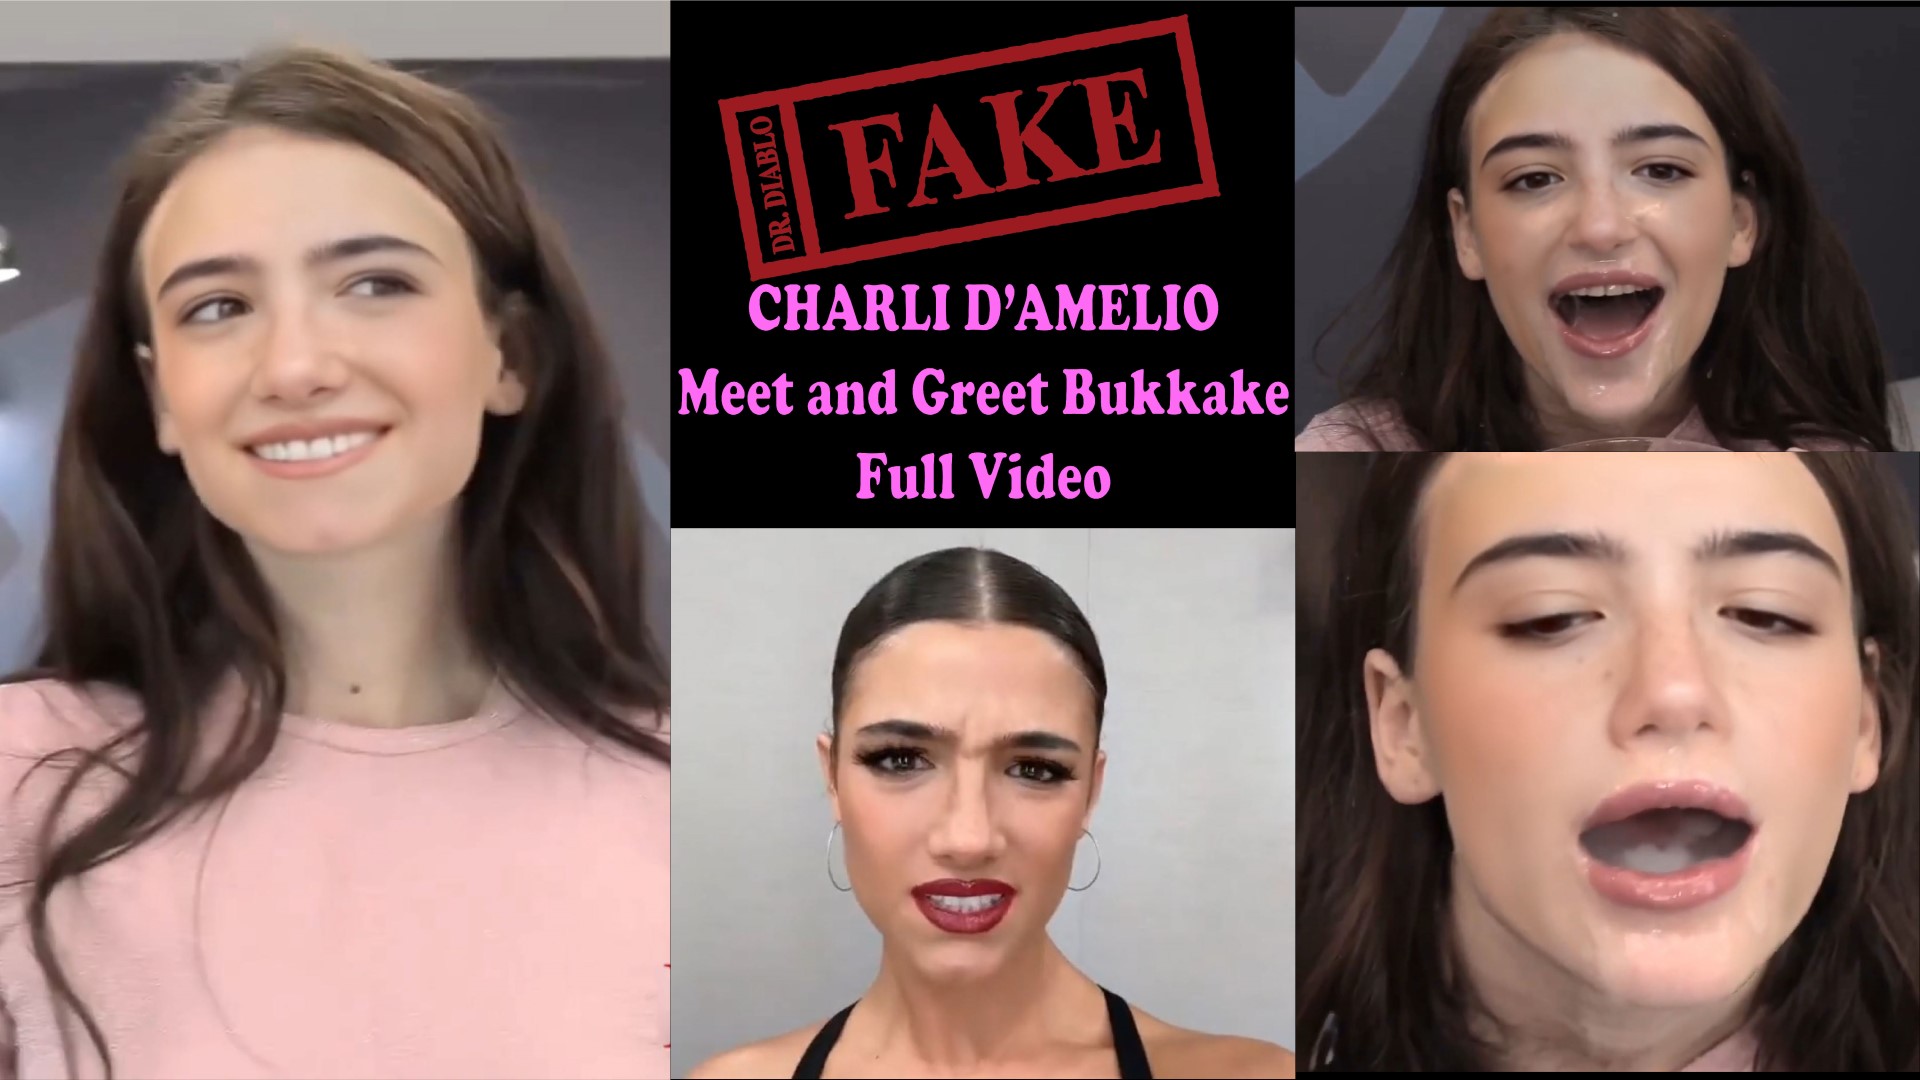 Fake Charli D'Amelio Swallows Over 100 Fan Loads at a Meet and Greet! [FULL VIDEO]